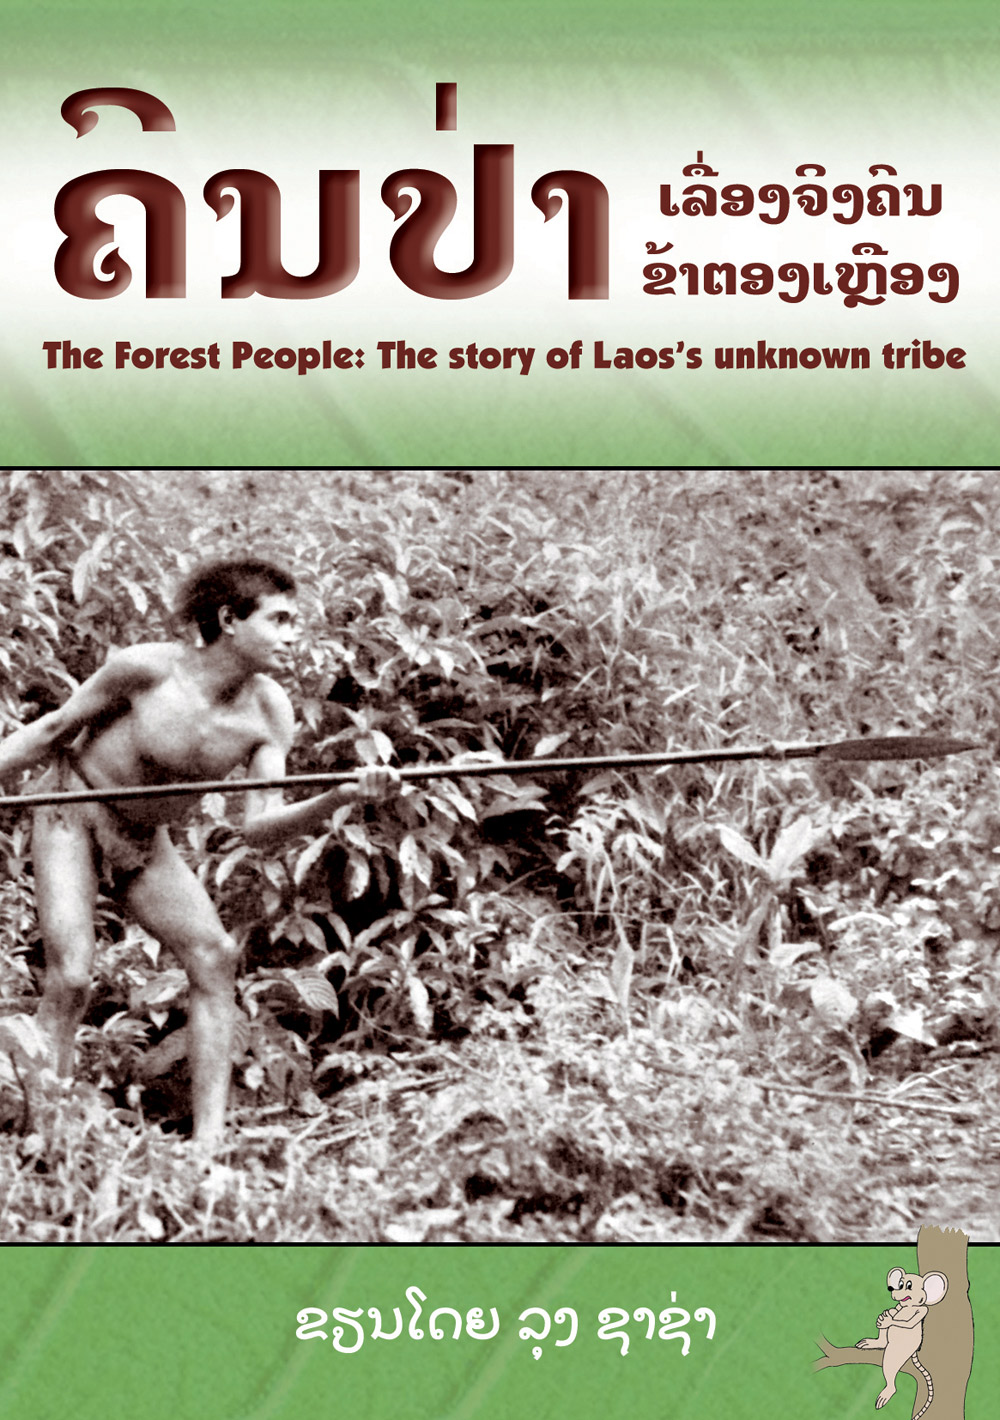 People of the Forest large book cover, published in Lao and English